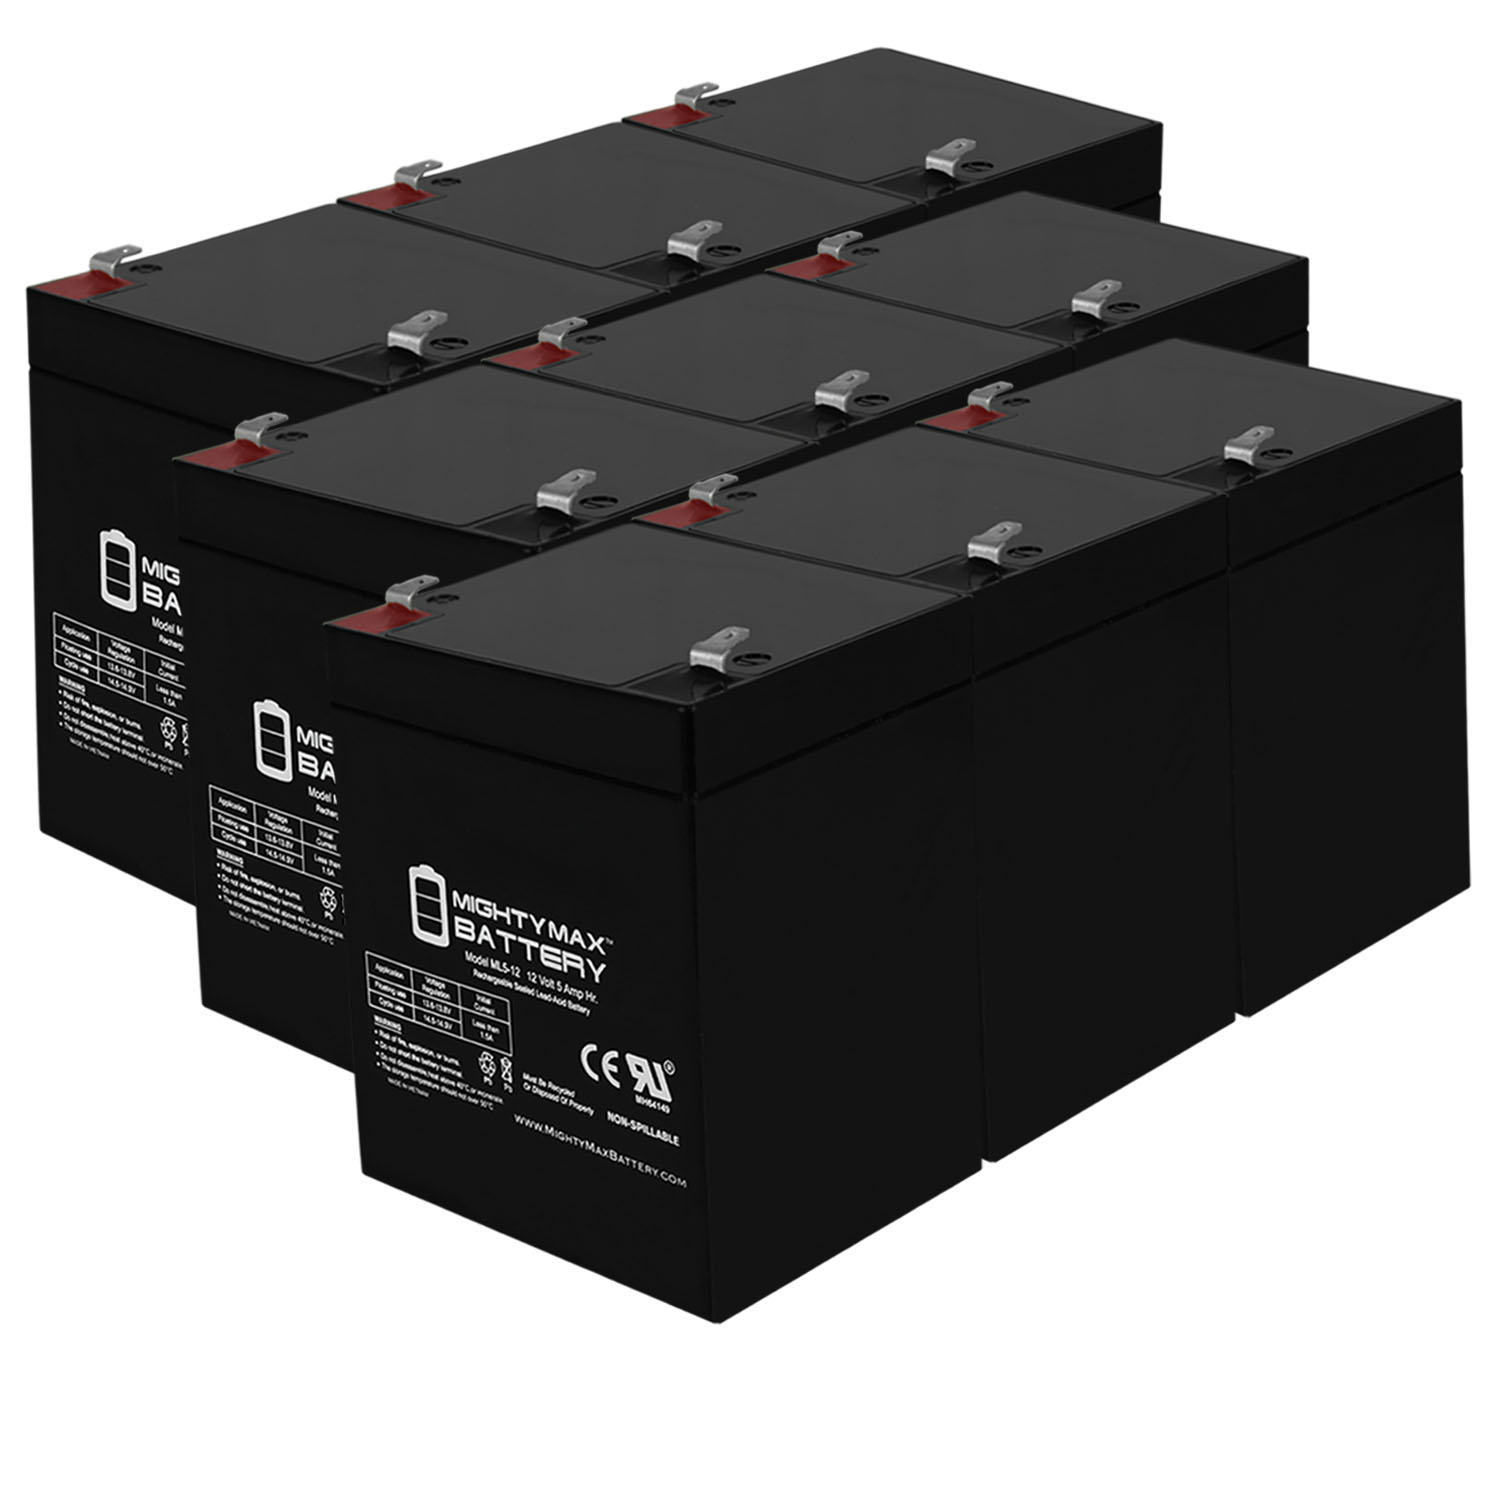 12V 5AH SLA Replacement Battery for Upsonic PC Might 25 - 9 Pack